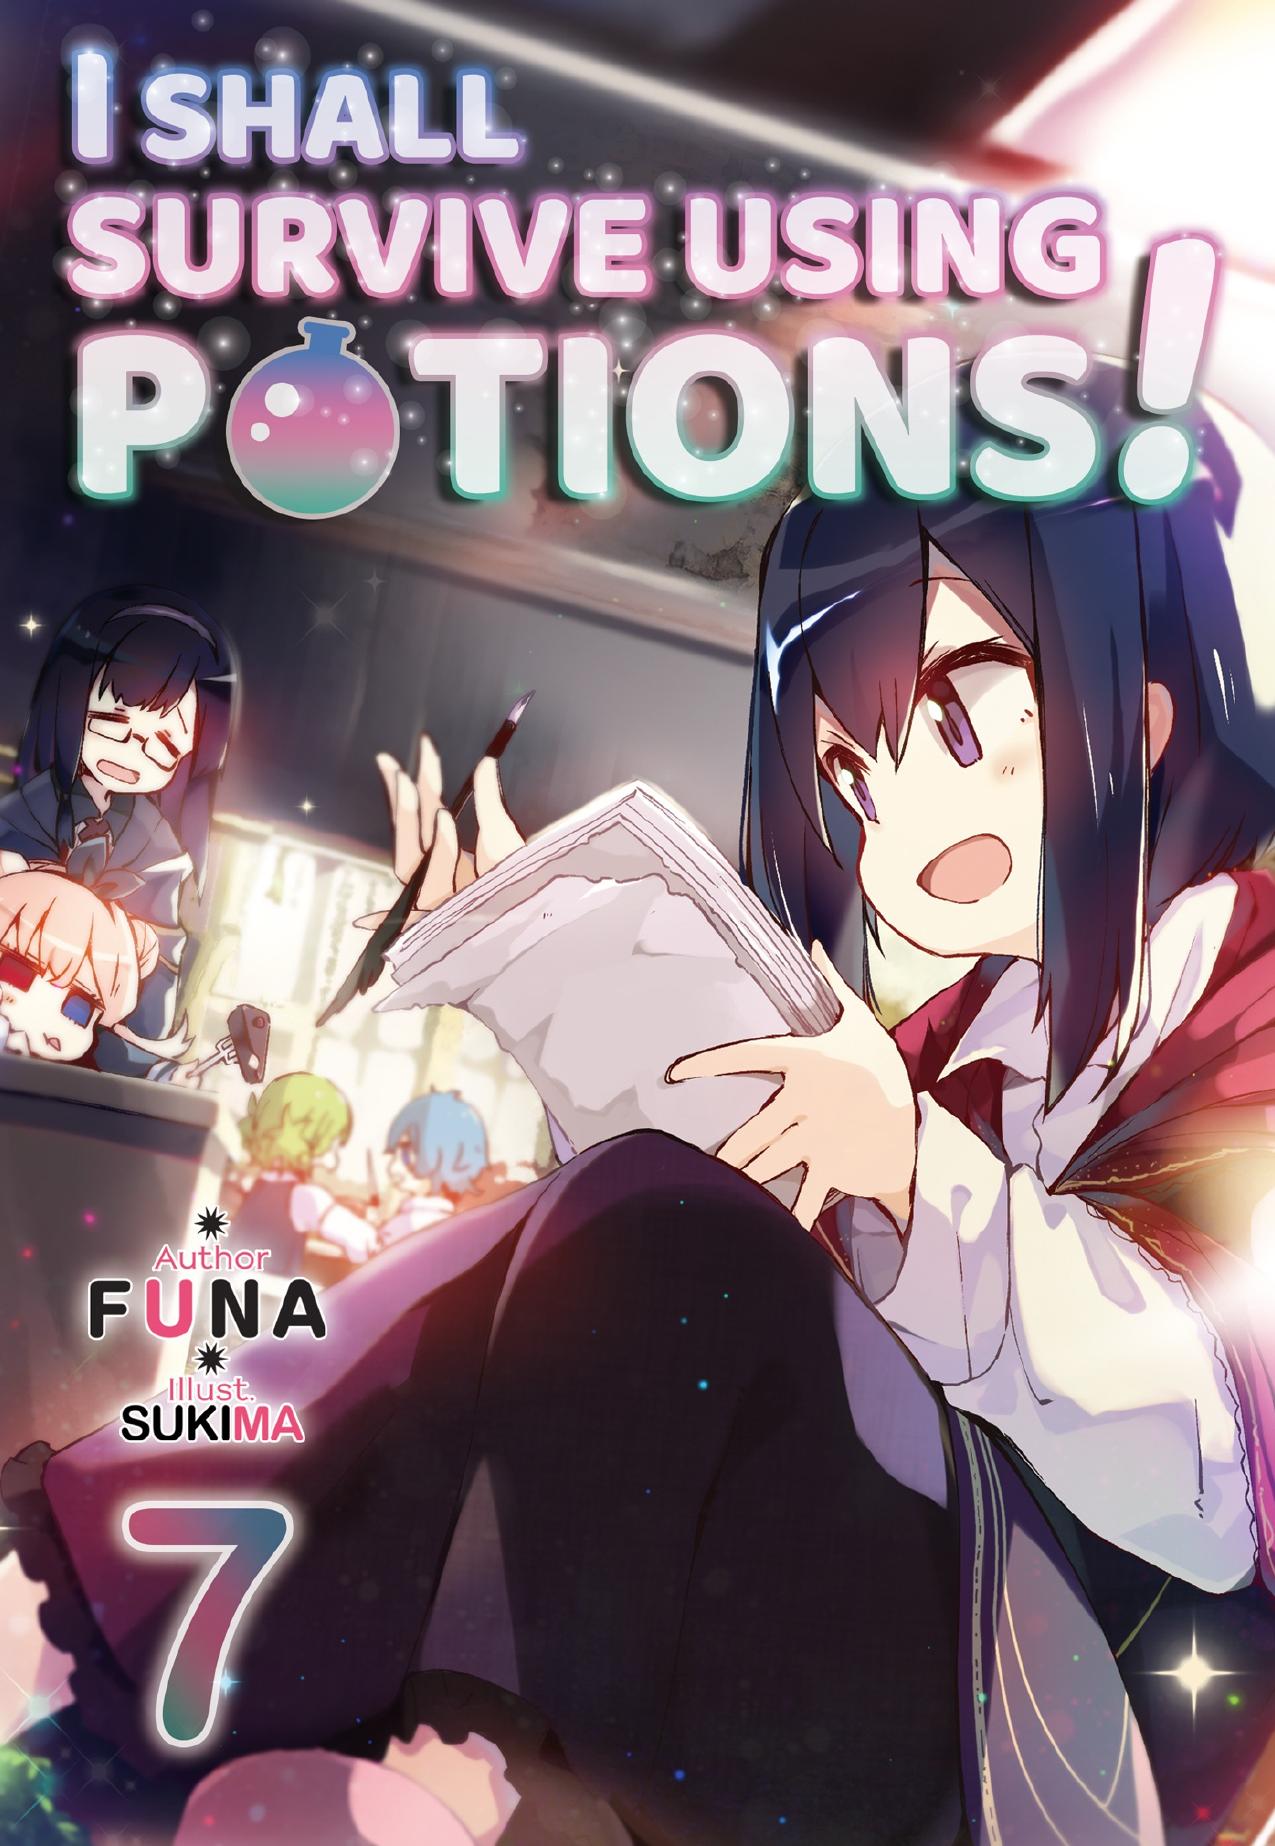 I Shall Survive Using Potions! Volume 7 by FUNA